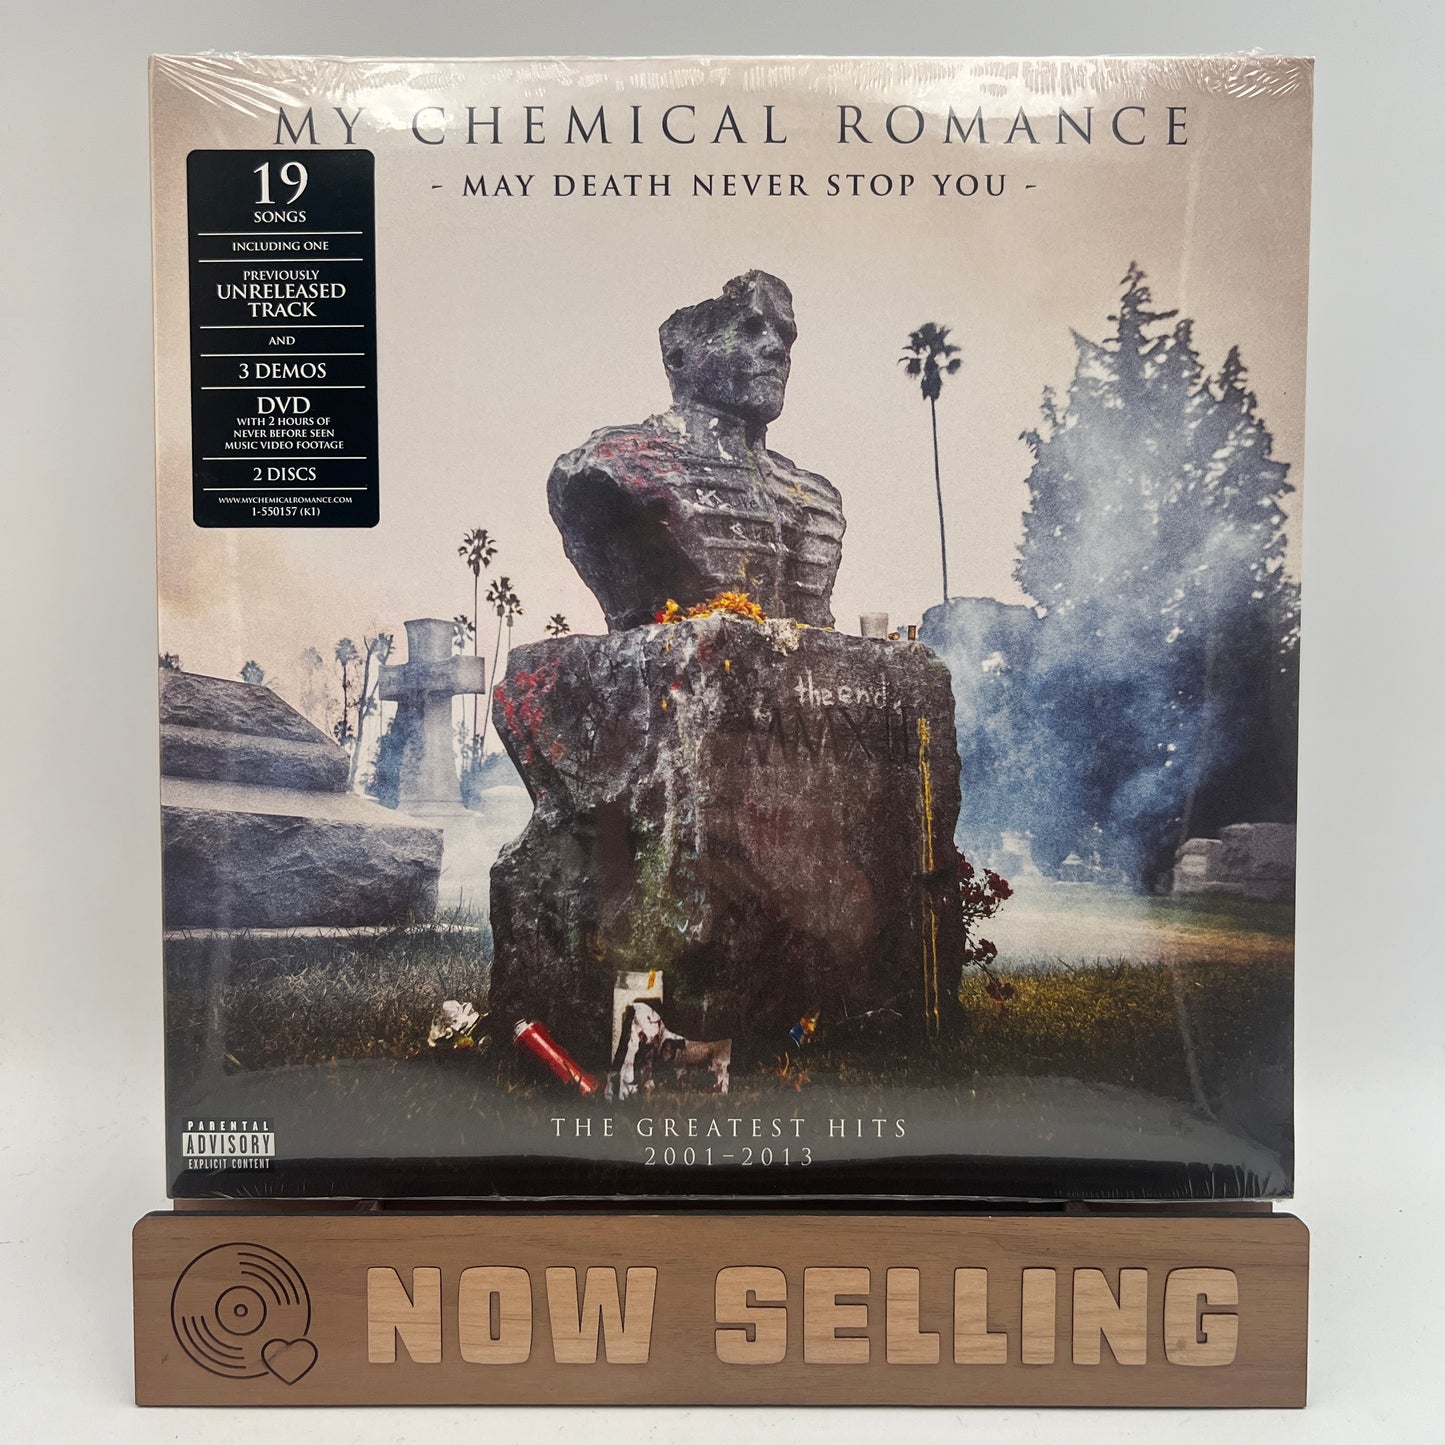 My Chemical Romance - May Death Never Stop You Vinyl LP Promo SEALED w/ DVD